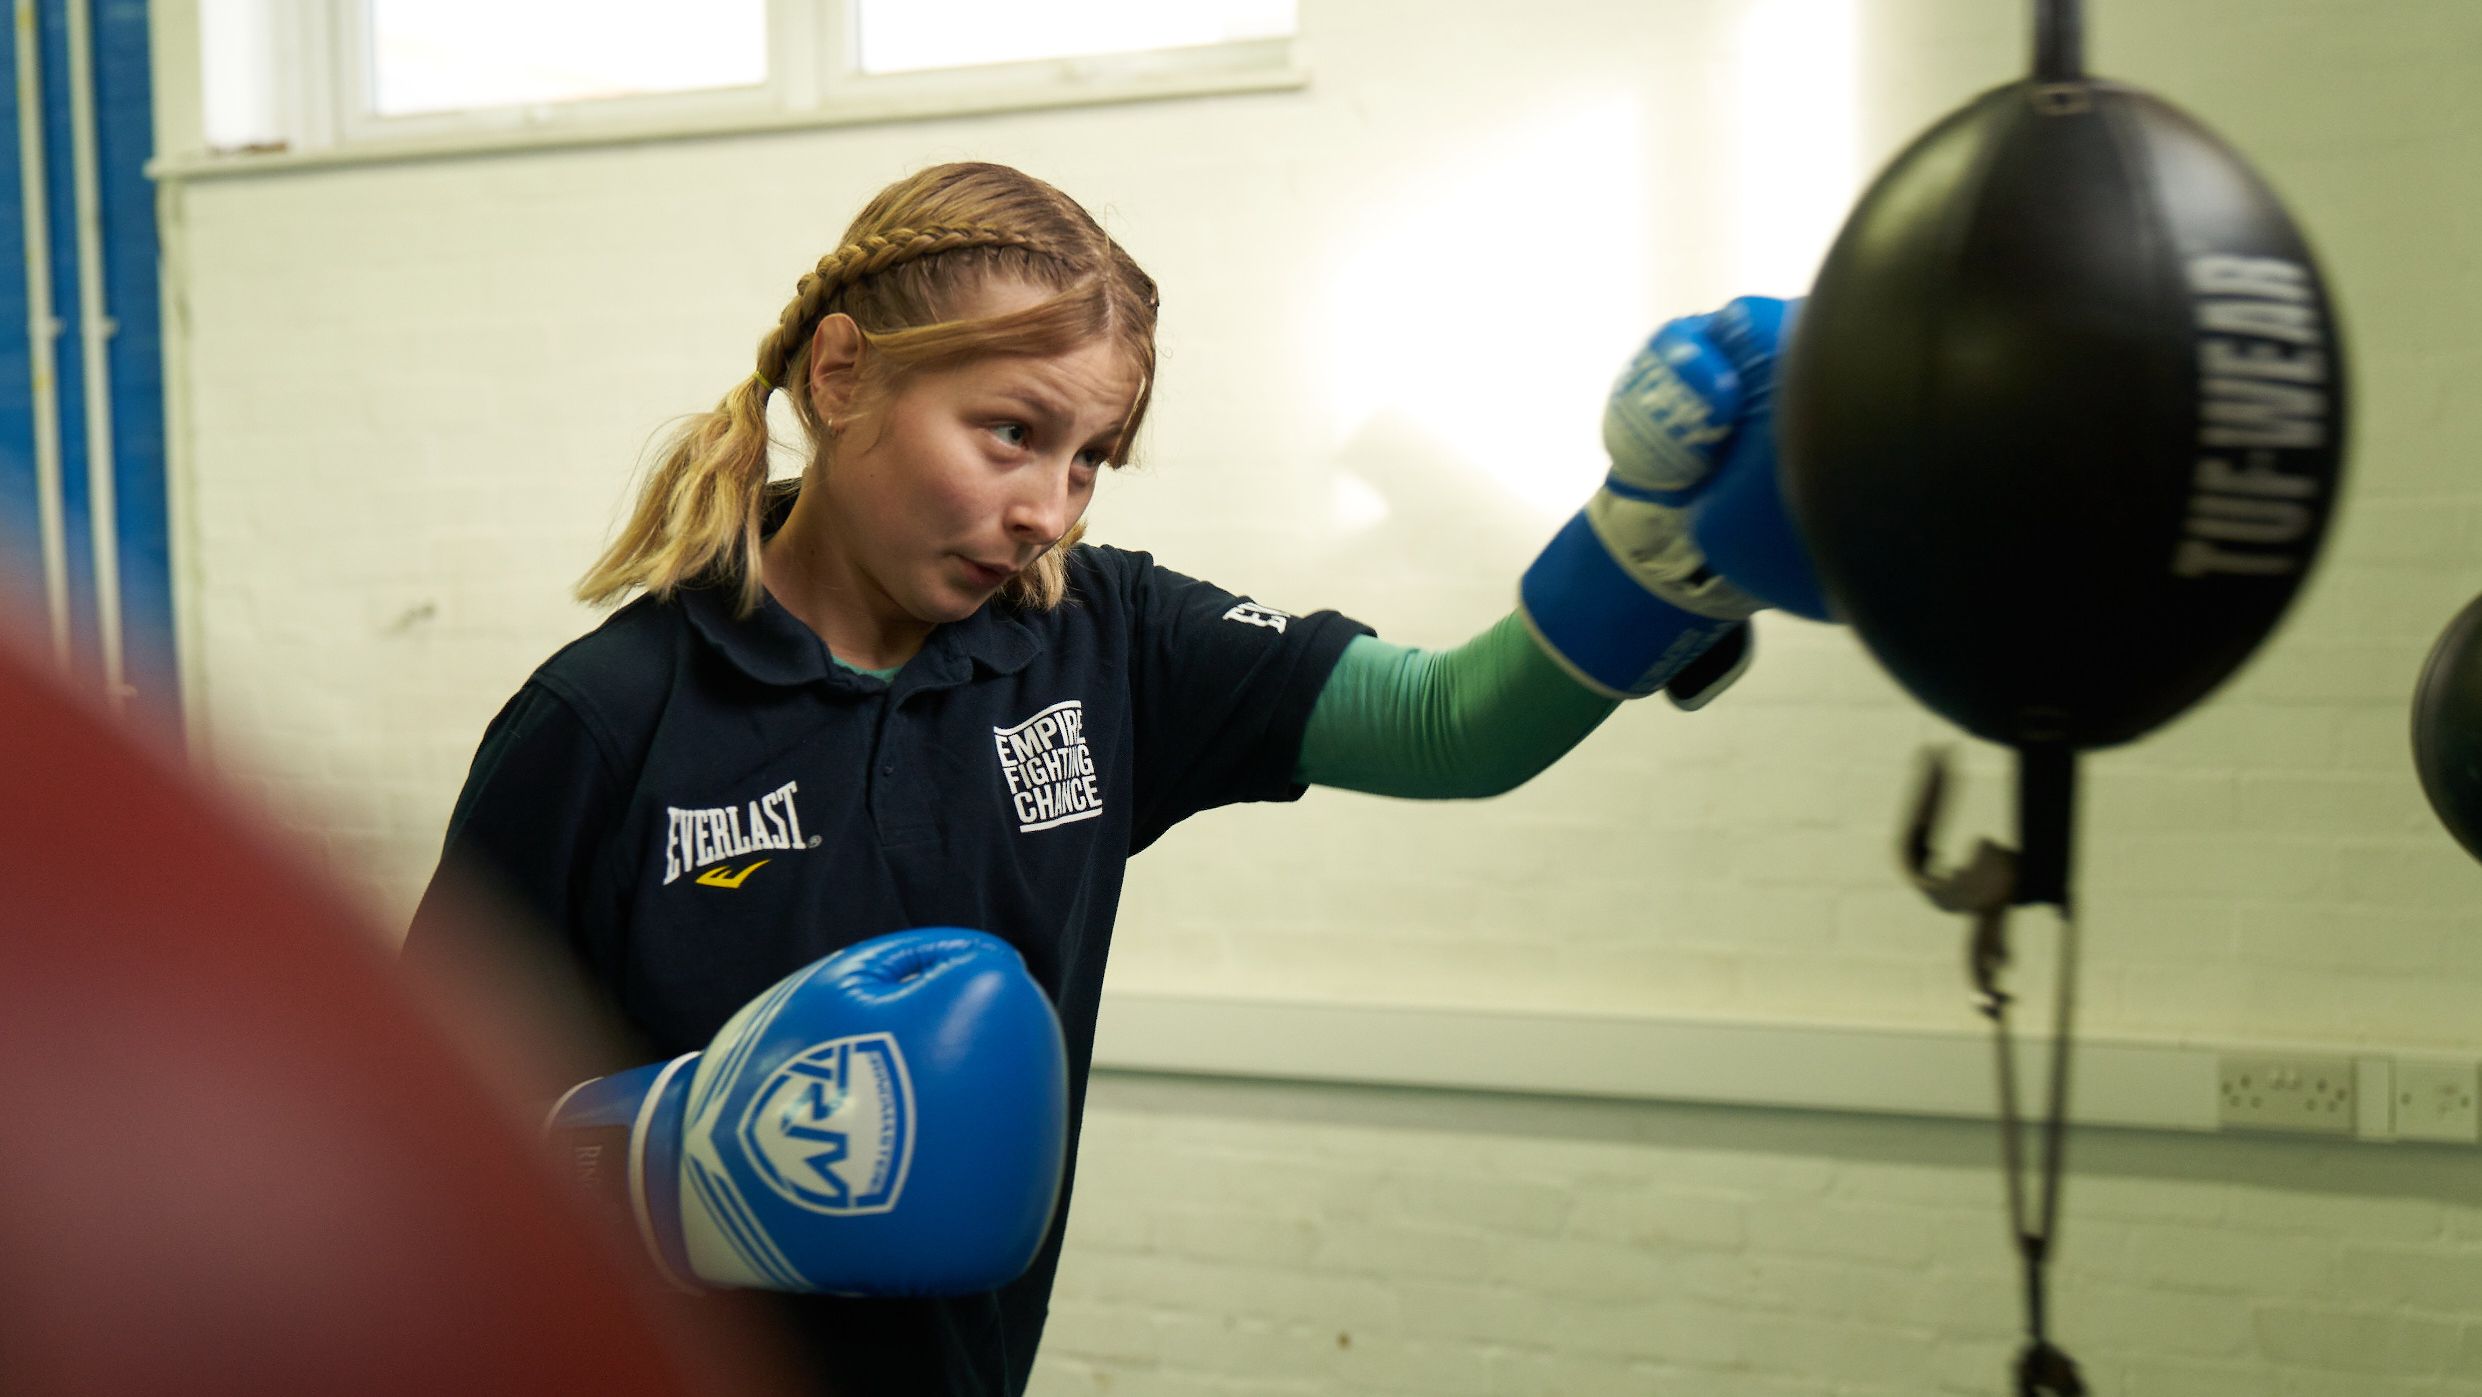 Empire Fighting Chance is a Bristol boxing gym fighting against the impact of inequality on young people’s lives